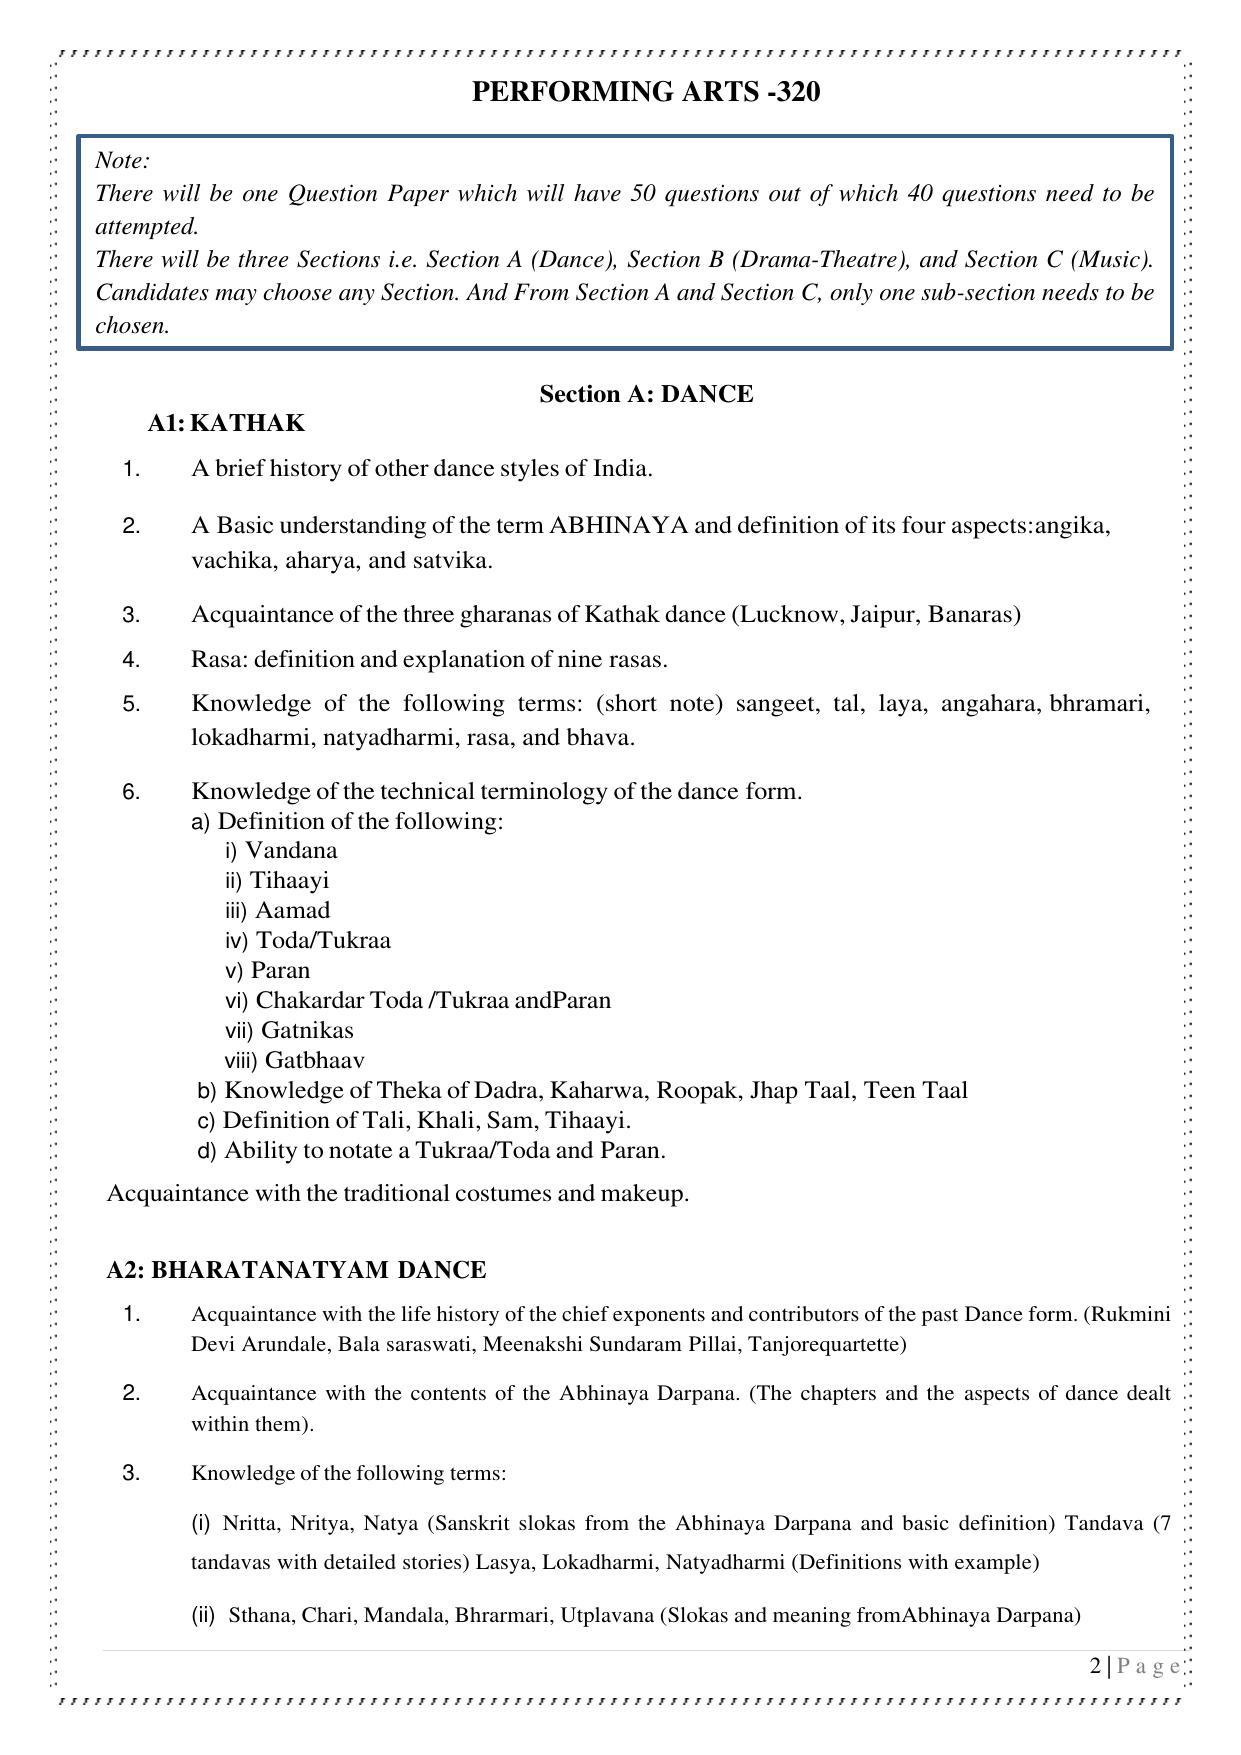 CUET Syllabus for Performing Arts (English) - Page 2